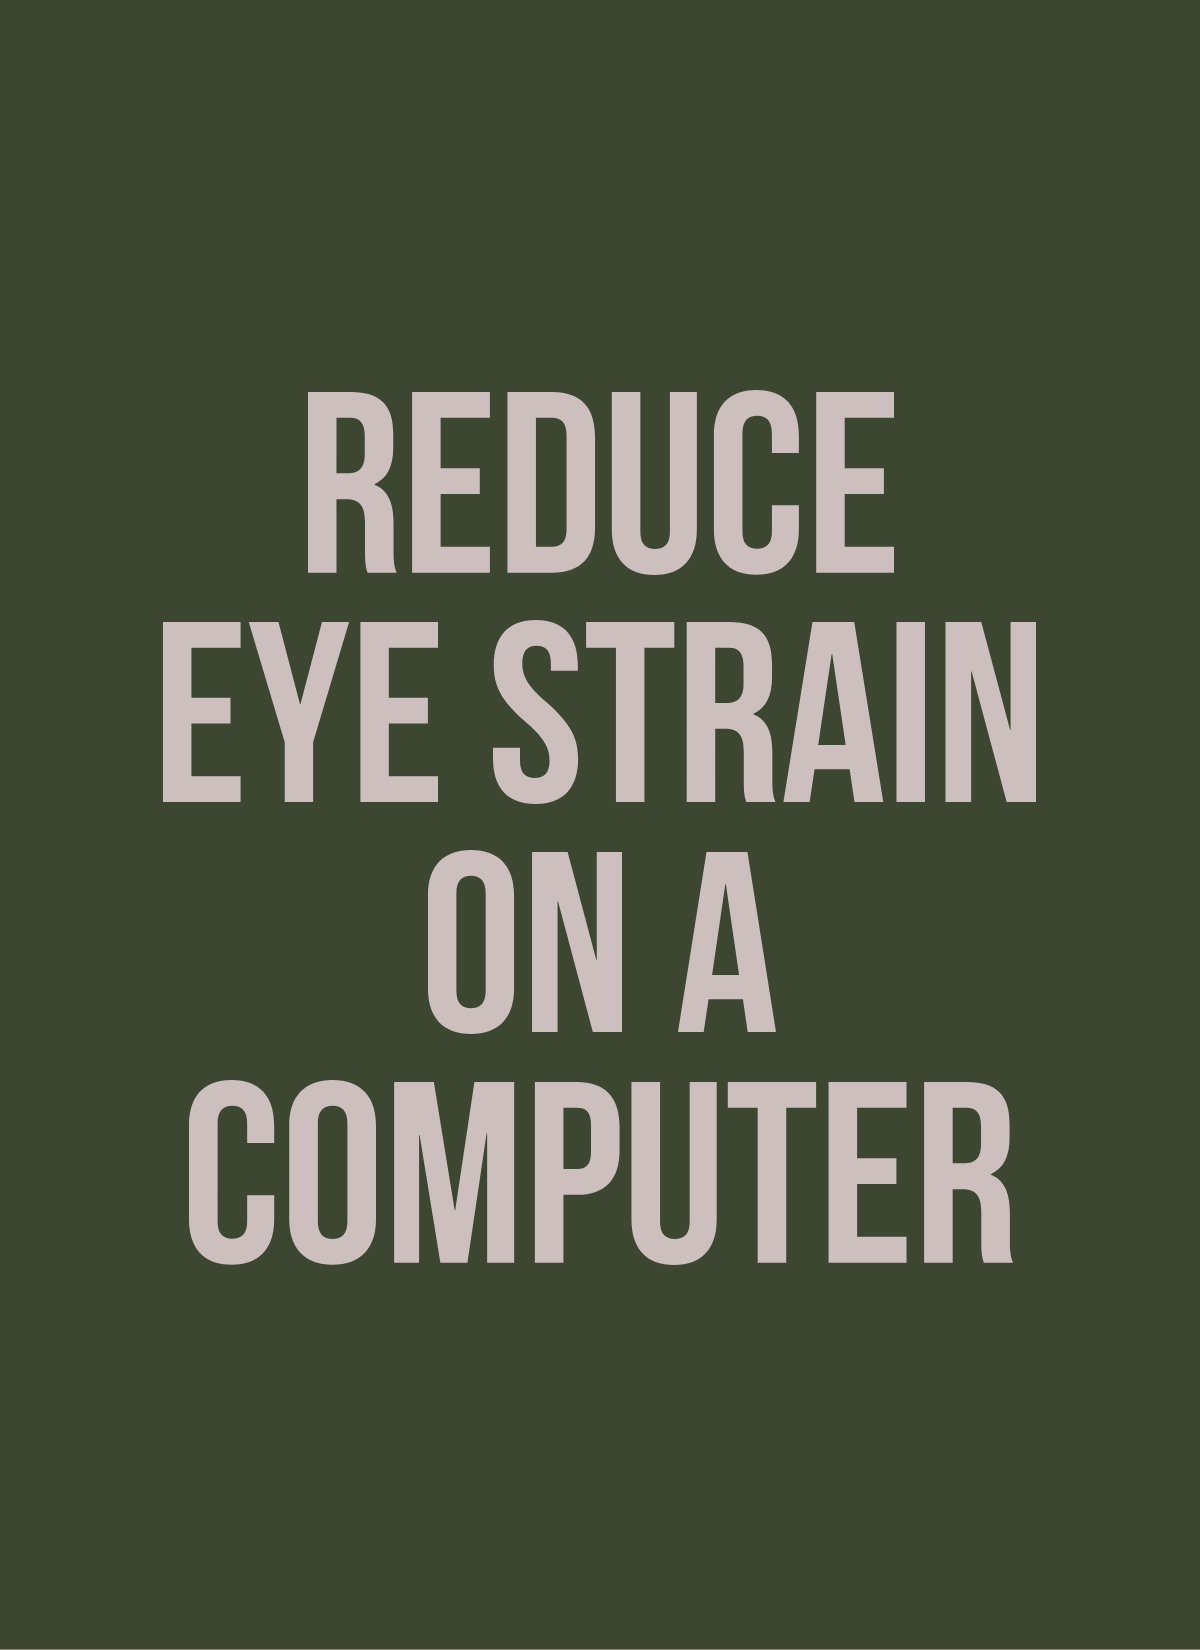 Reduce eye strain when working on a computer